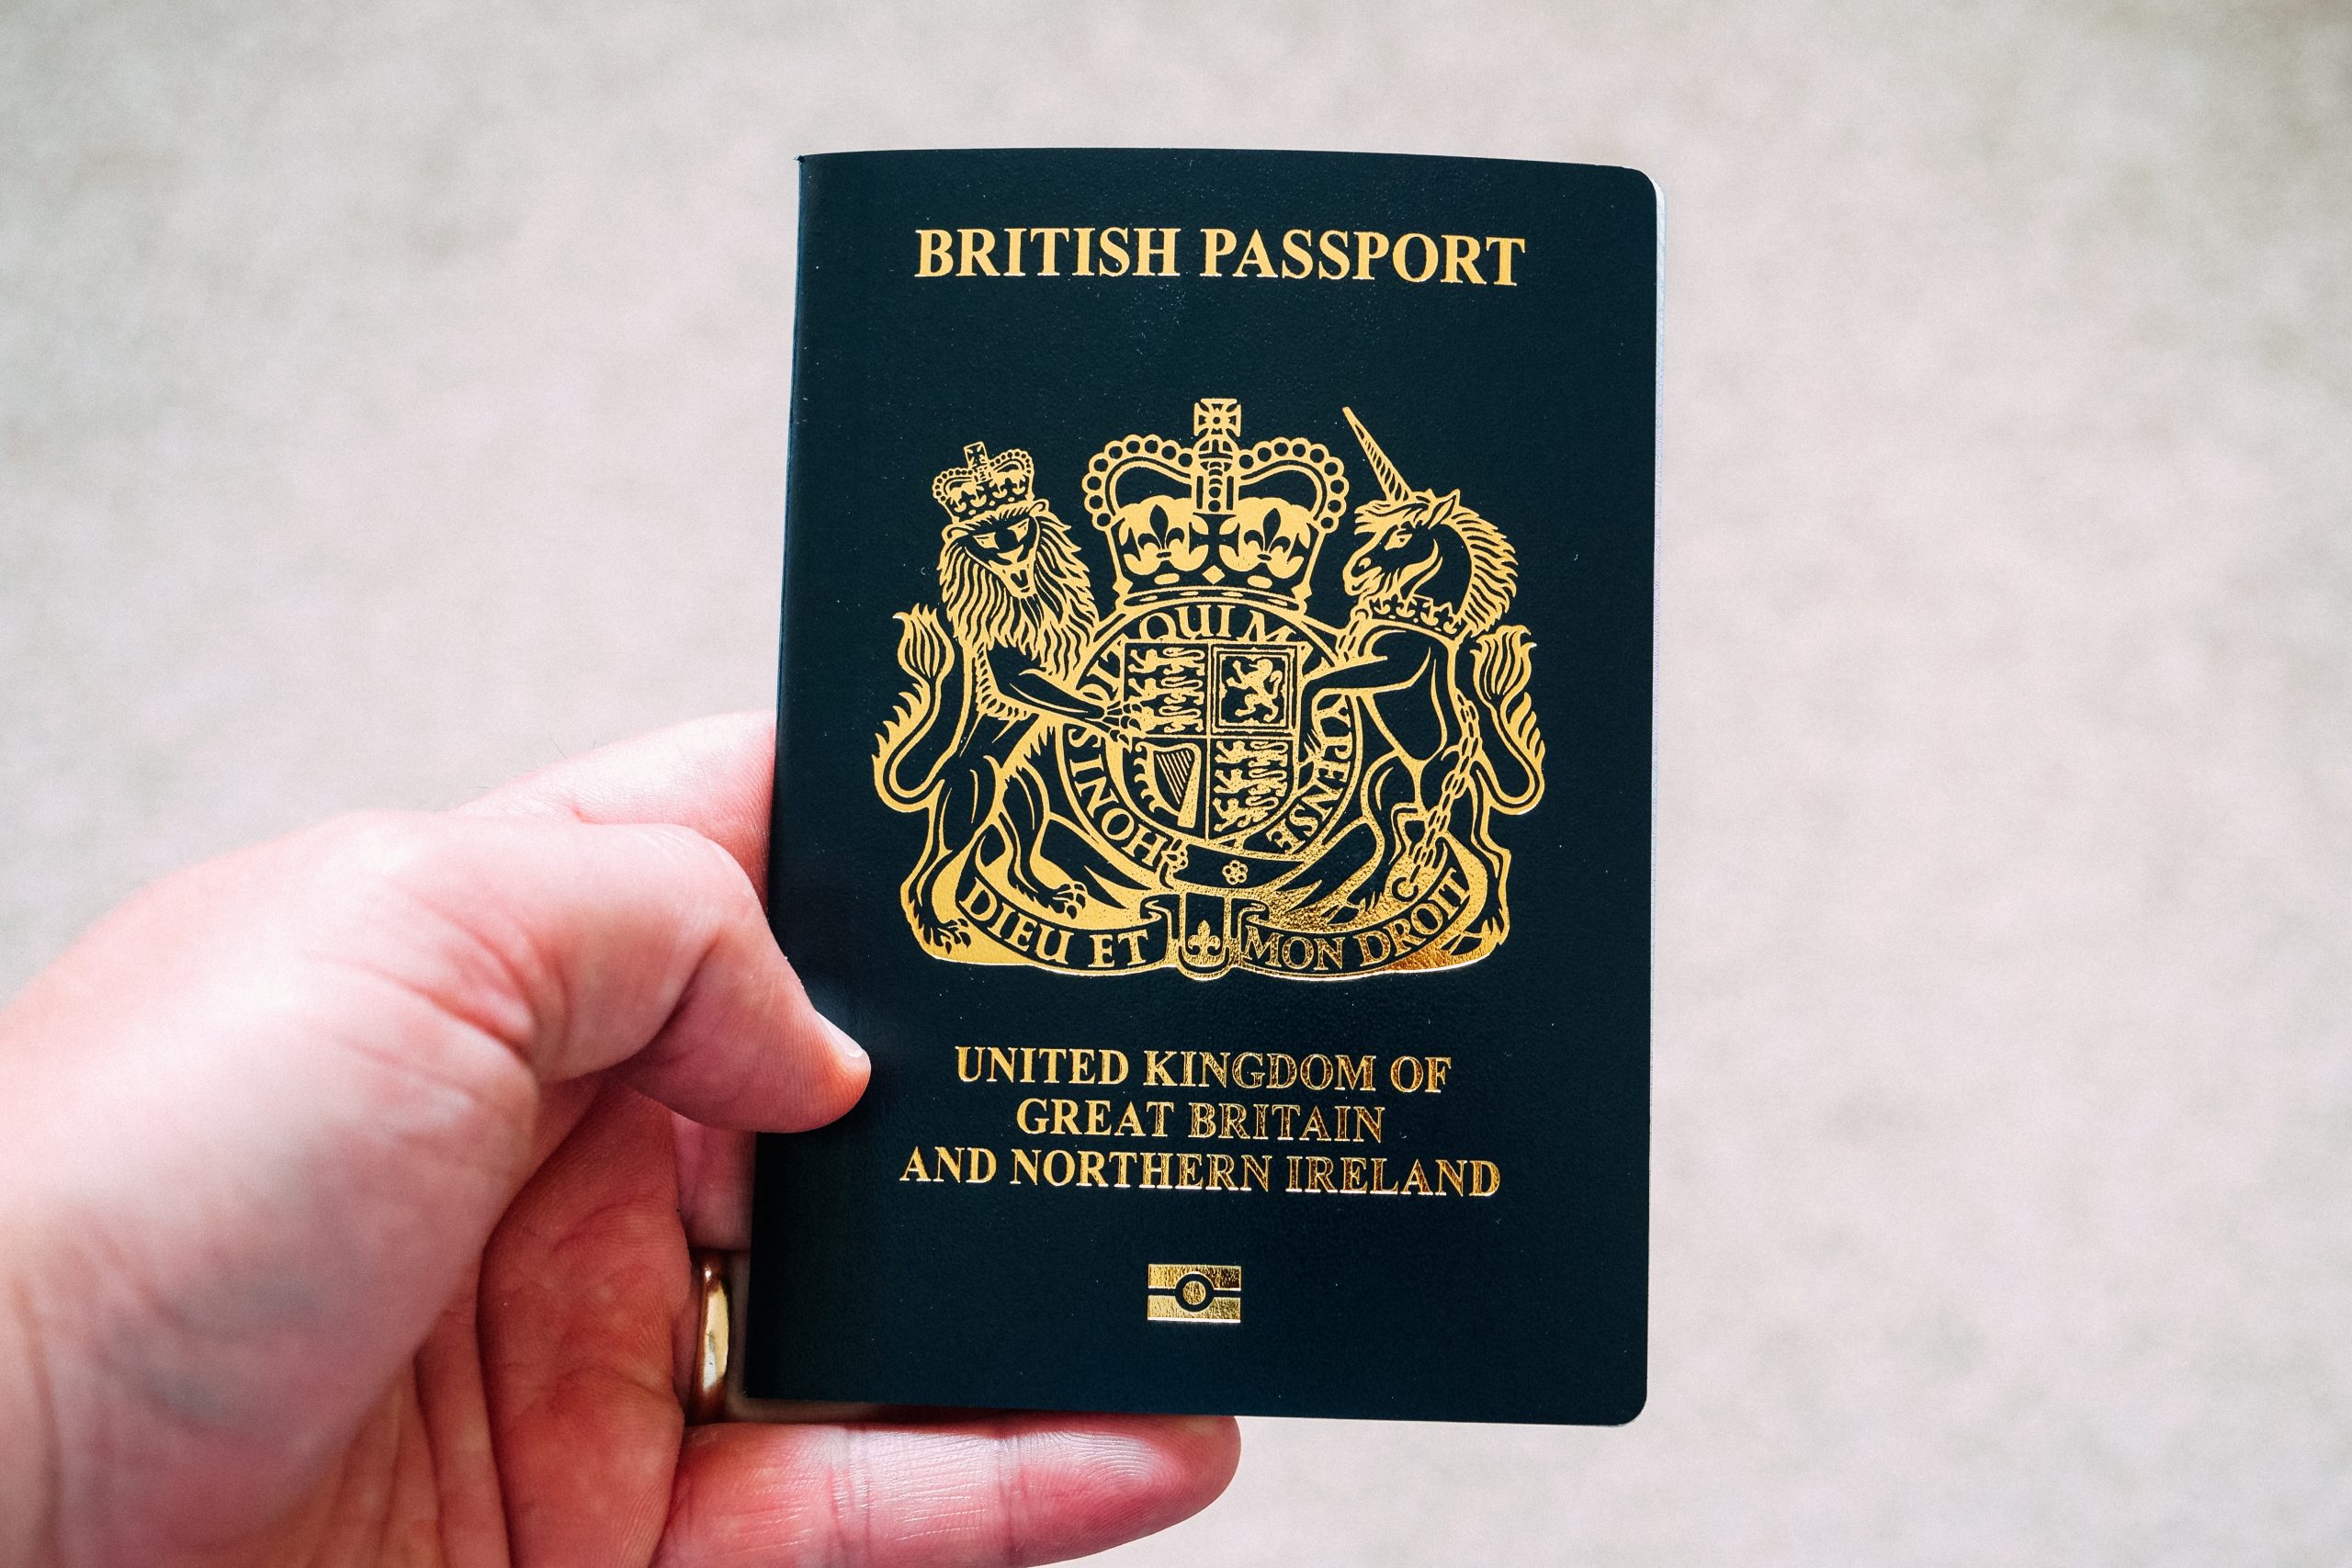 How long can you stay in an EU country with a British passport? Here’s what you need to know